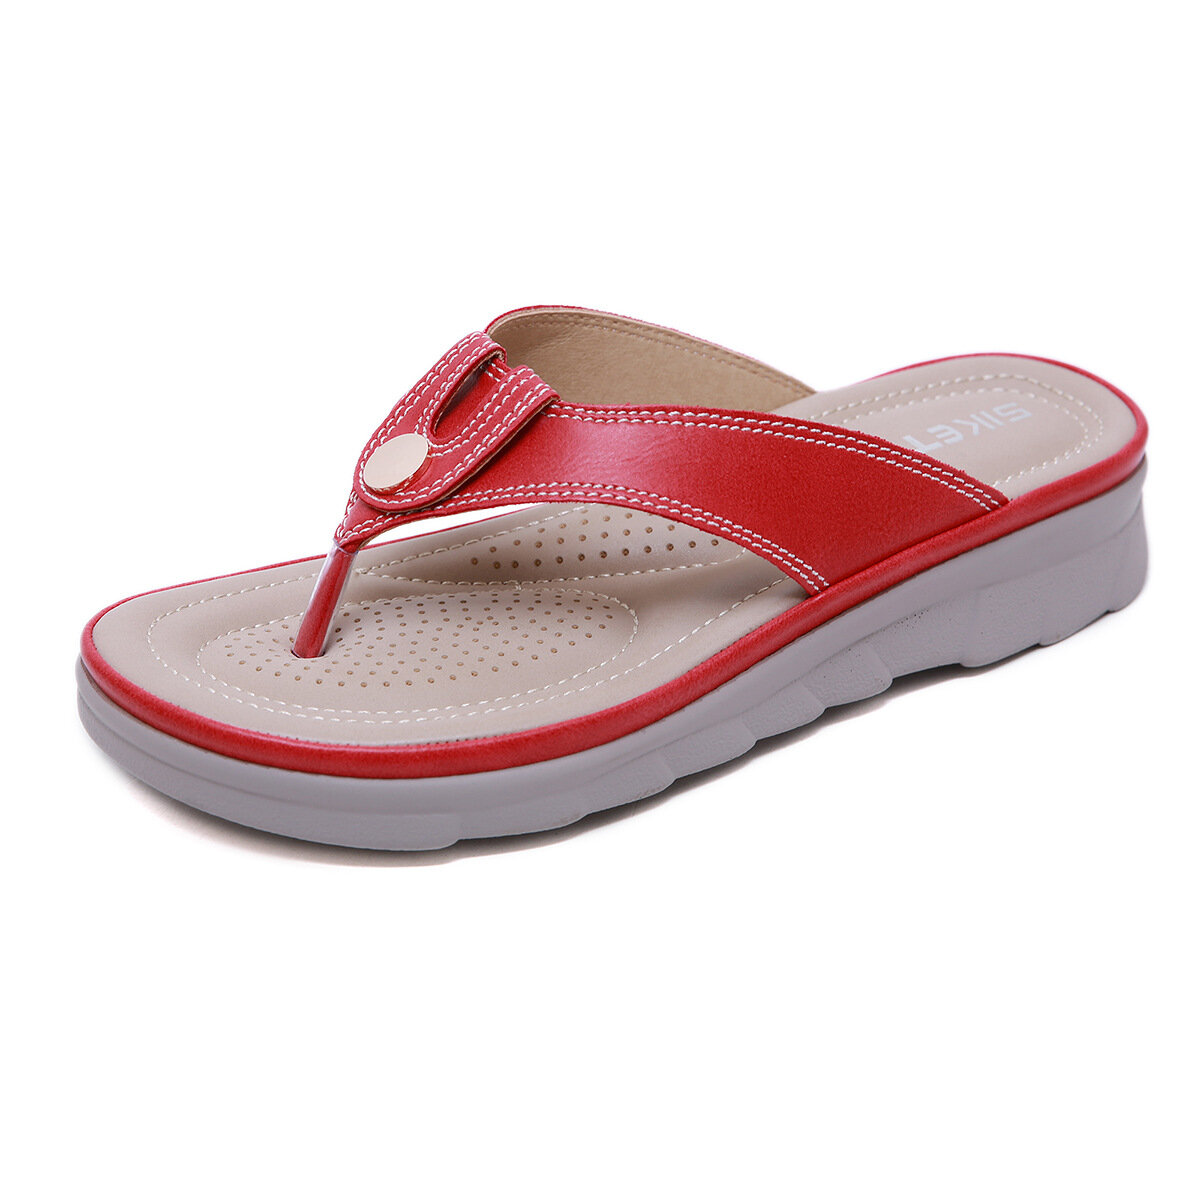 Large Size Clip Toe Stitching Flip Flops Beach Flat Casual Sandals